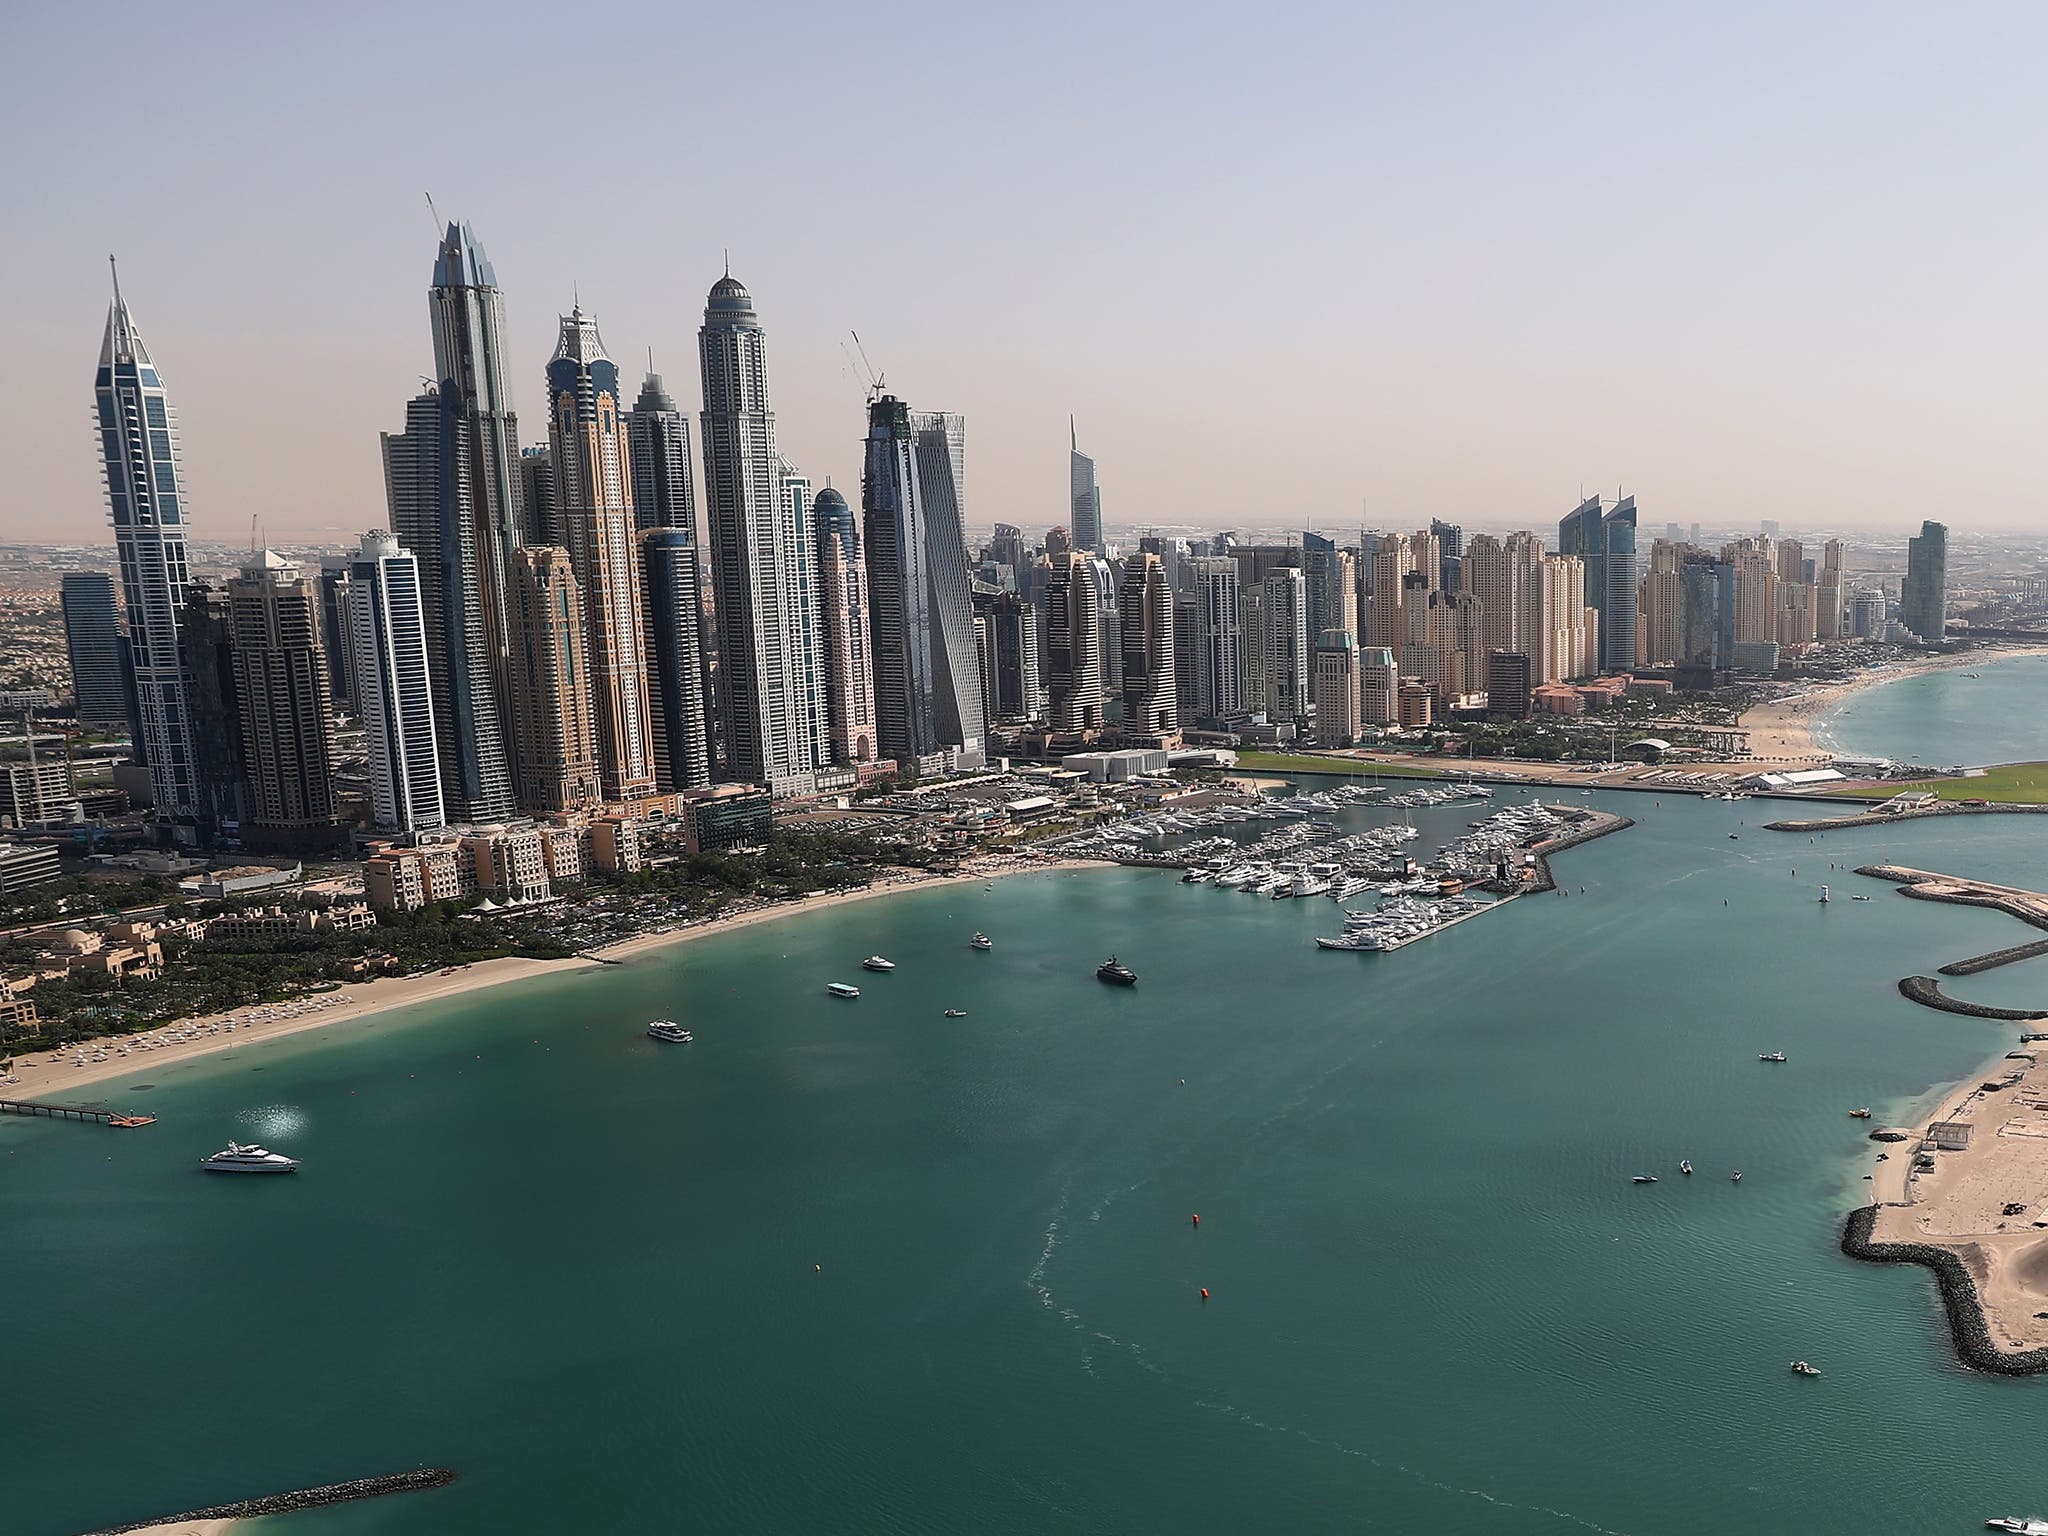 UK charity warns tourists in Dubai not to report rape after woman who was 'gang raped' arrested | The Independent | The Independent